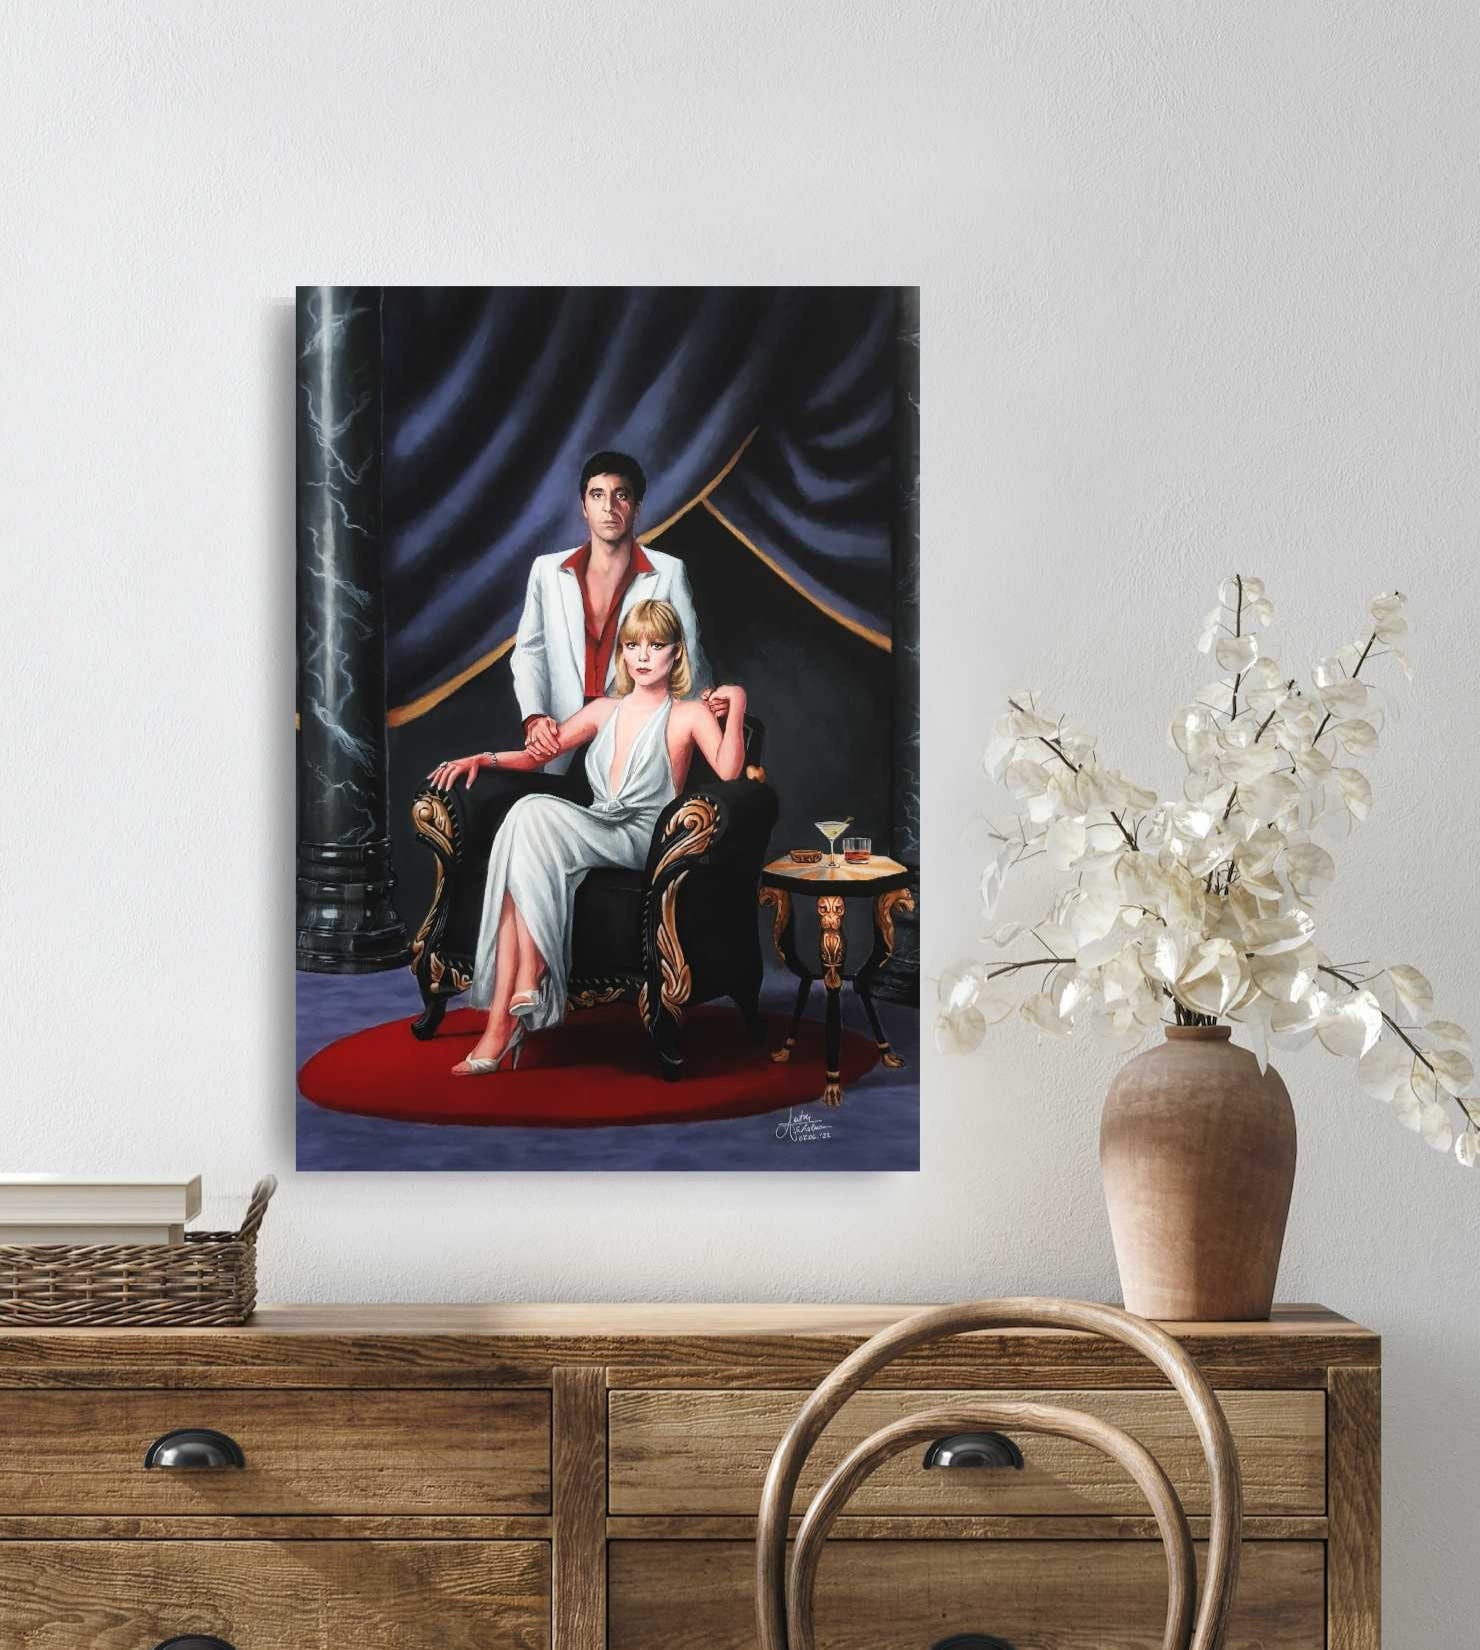 Modern Wall Art Poster Print of Al Pacino & Michelle Pfeiffer in Scarface,  Made After Original Painting nothing Exceeds Like Excess 